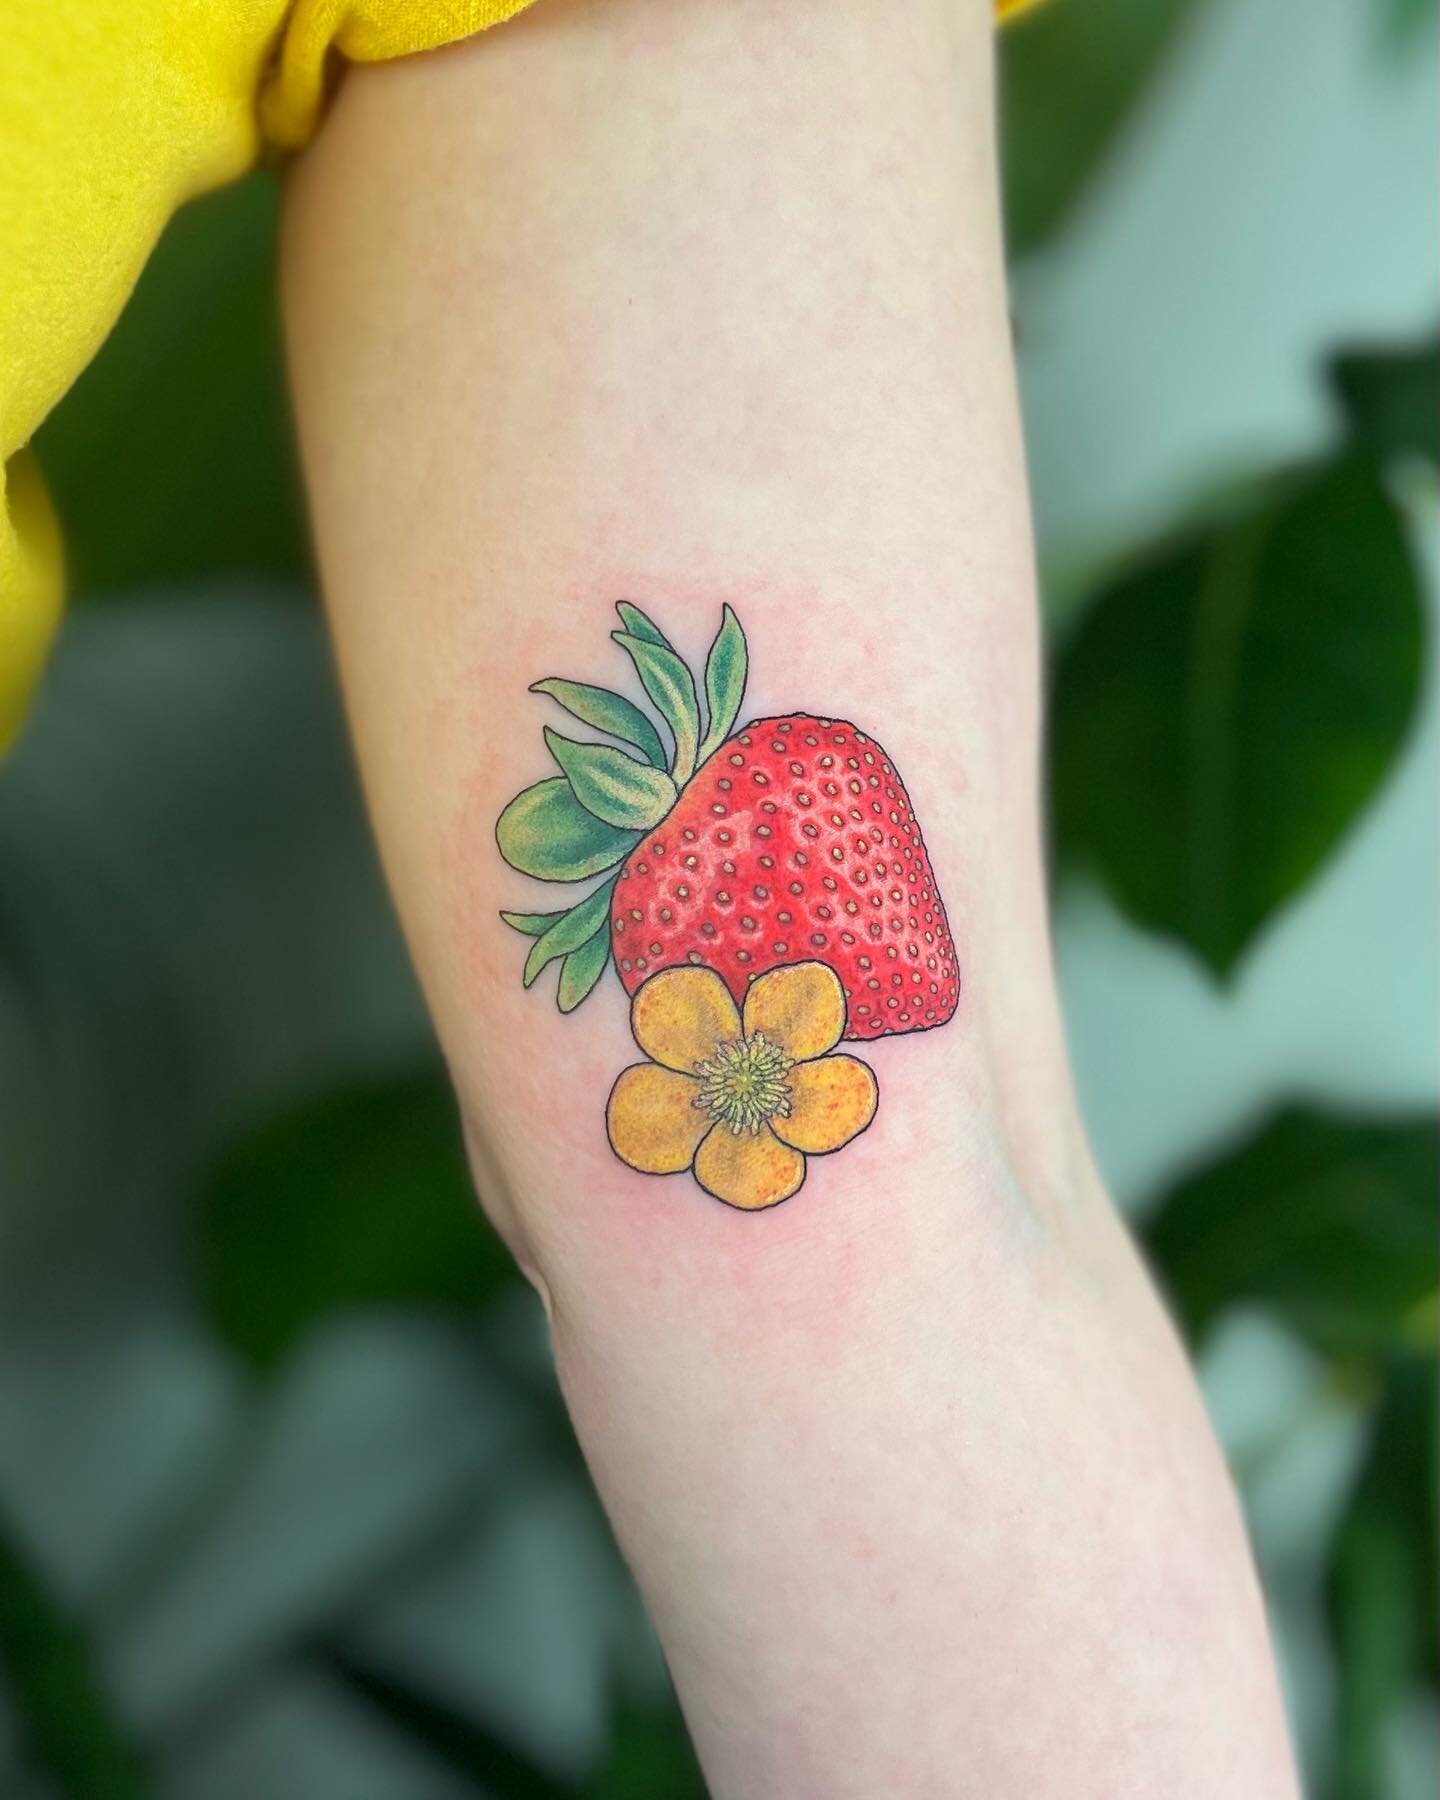 strawberry + buttercup 
really enjoyed making this piece to honor kimberly&rsquo;s kiddos. 
&bull;
#RayCorsonTattoo 
#DallasTattooArtist 
#TexasTattoos
#FemaleTattooer 
#Strawberry 
#StrawberryTattoo 
#Buttercup